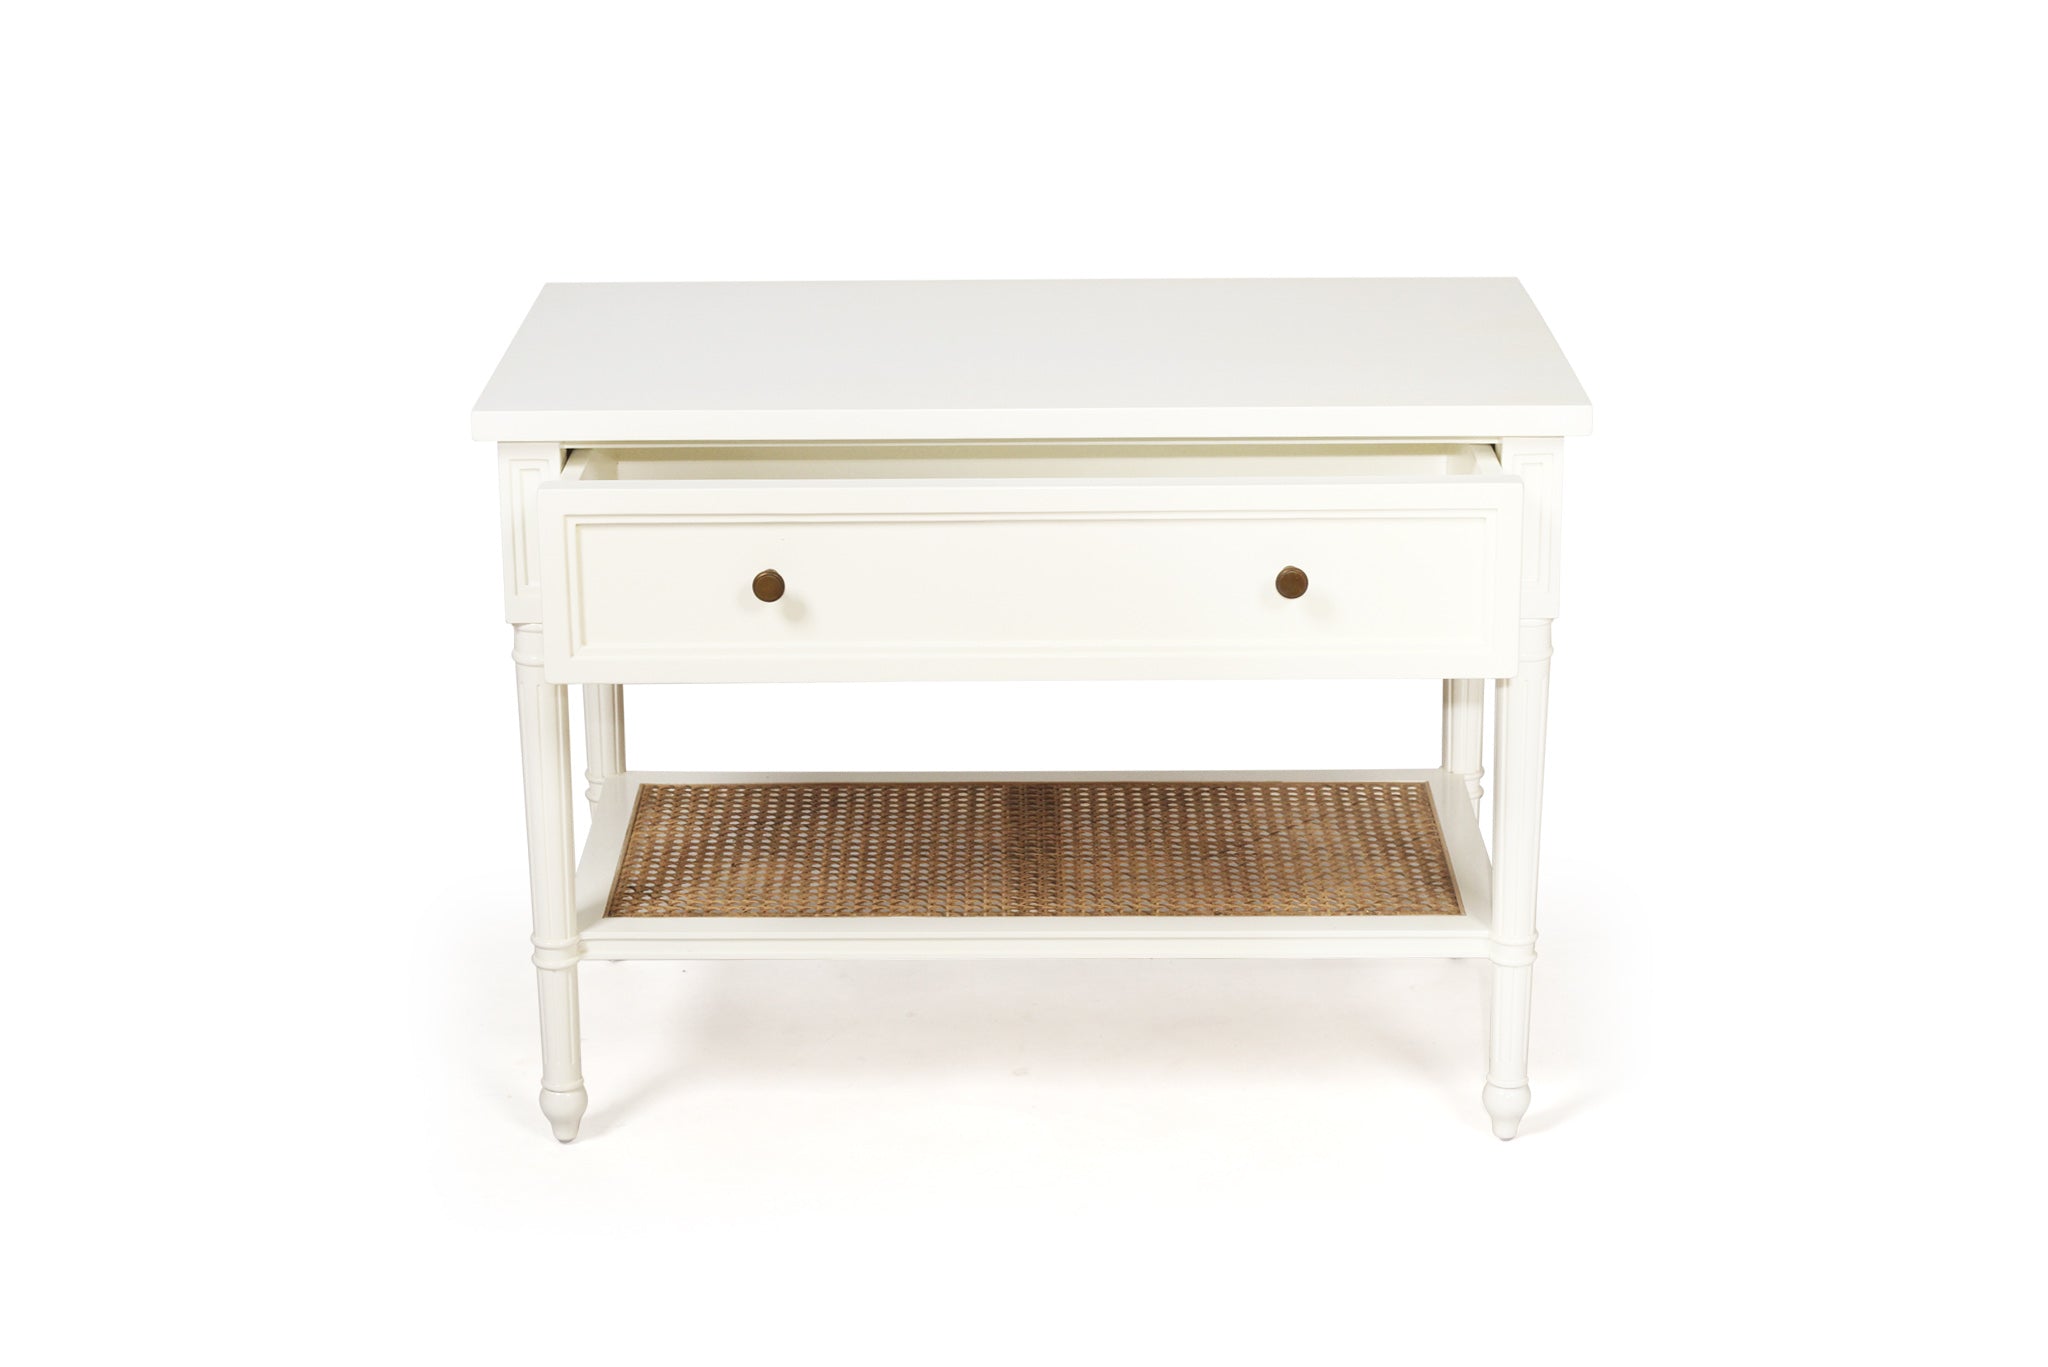 Vaucluse Mahogany & Cane Nightstand / Bedside Table – White